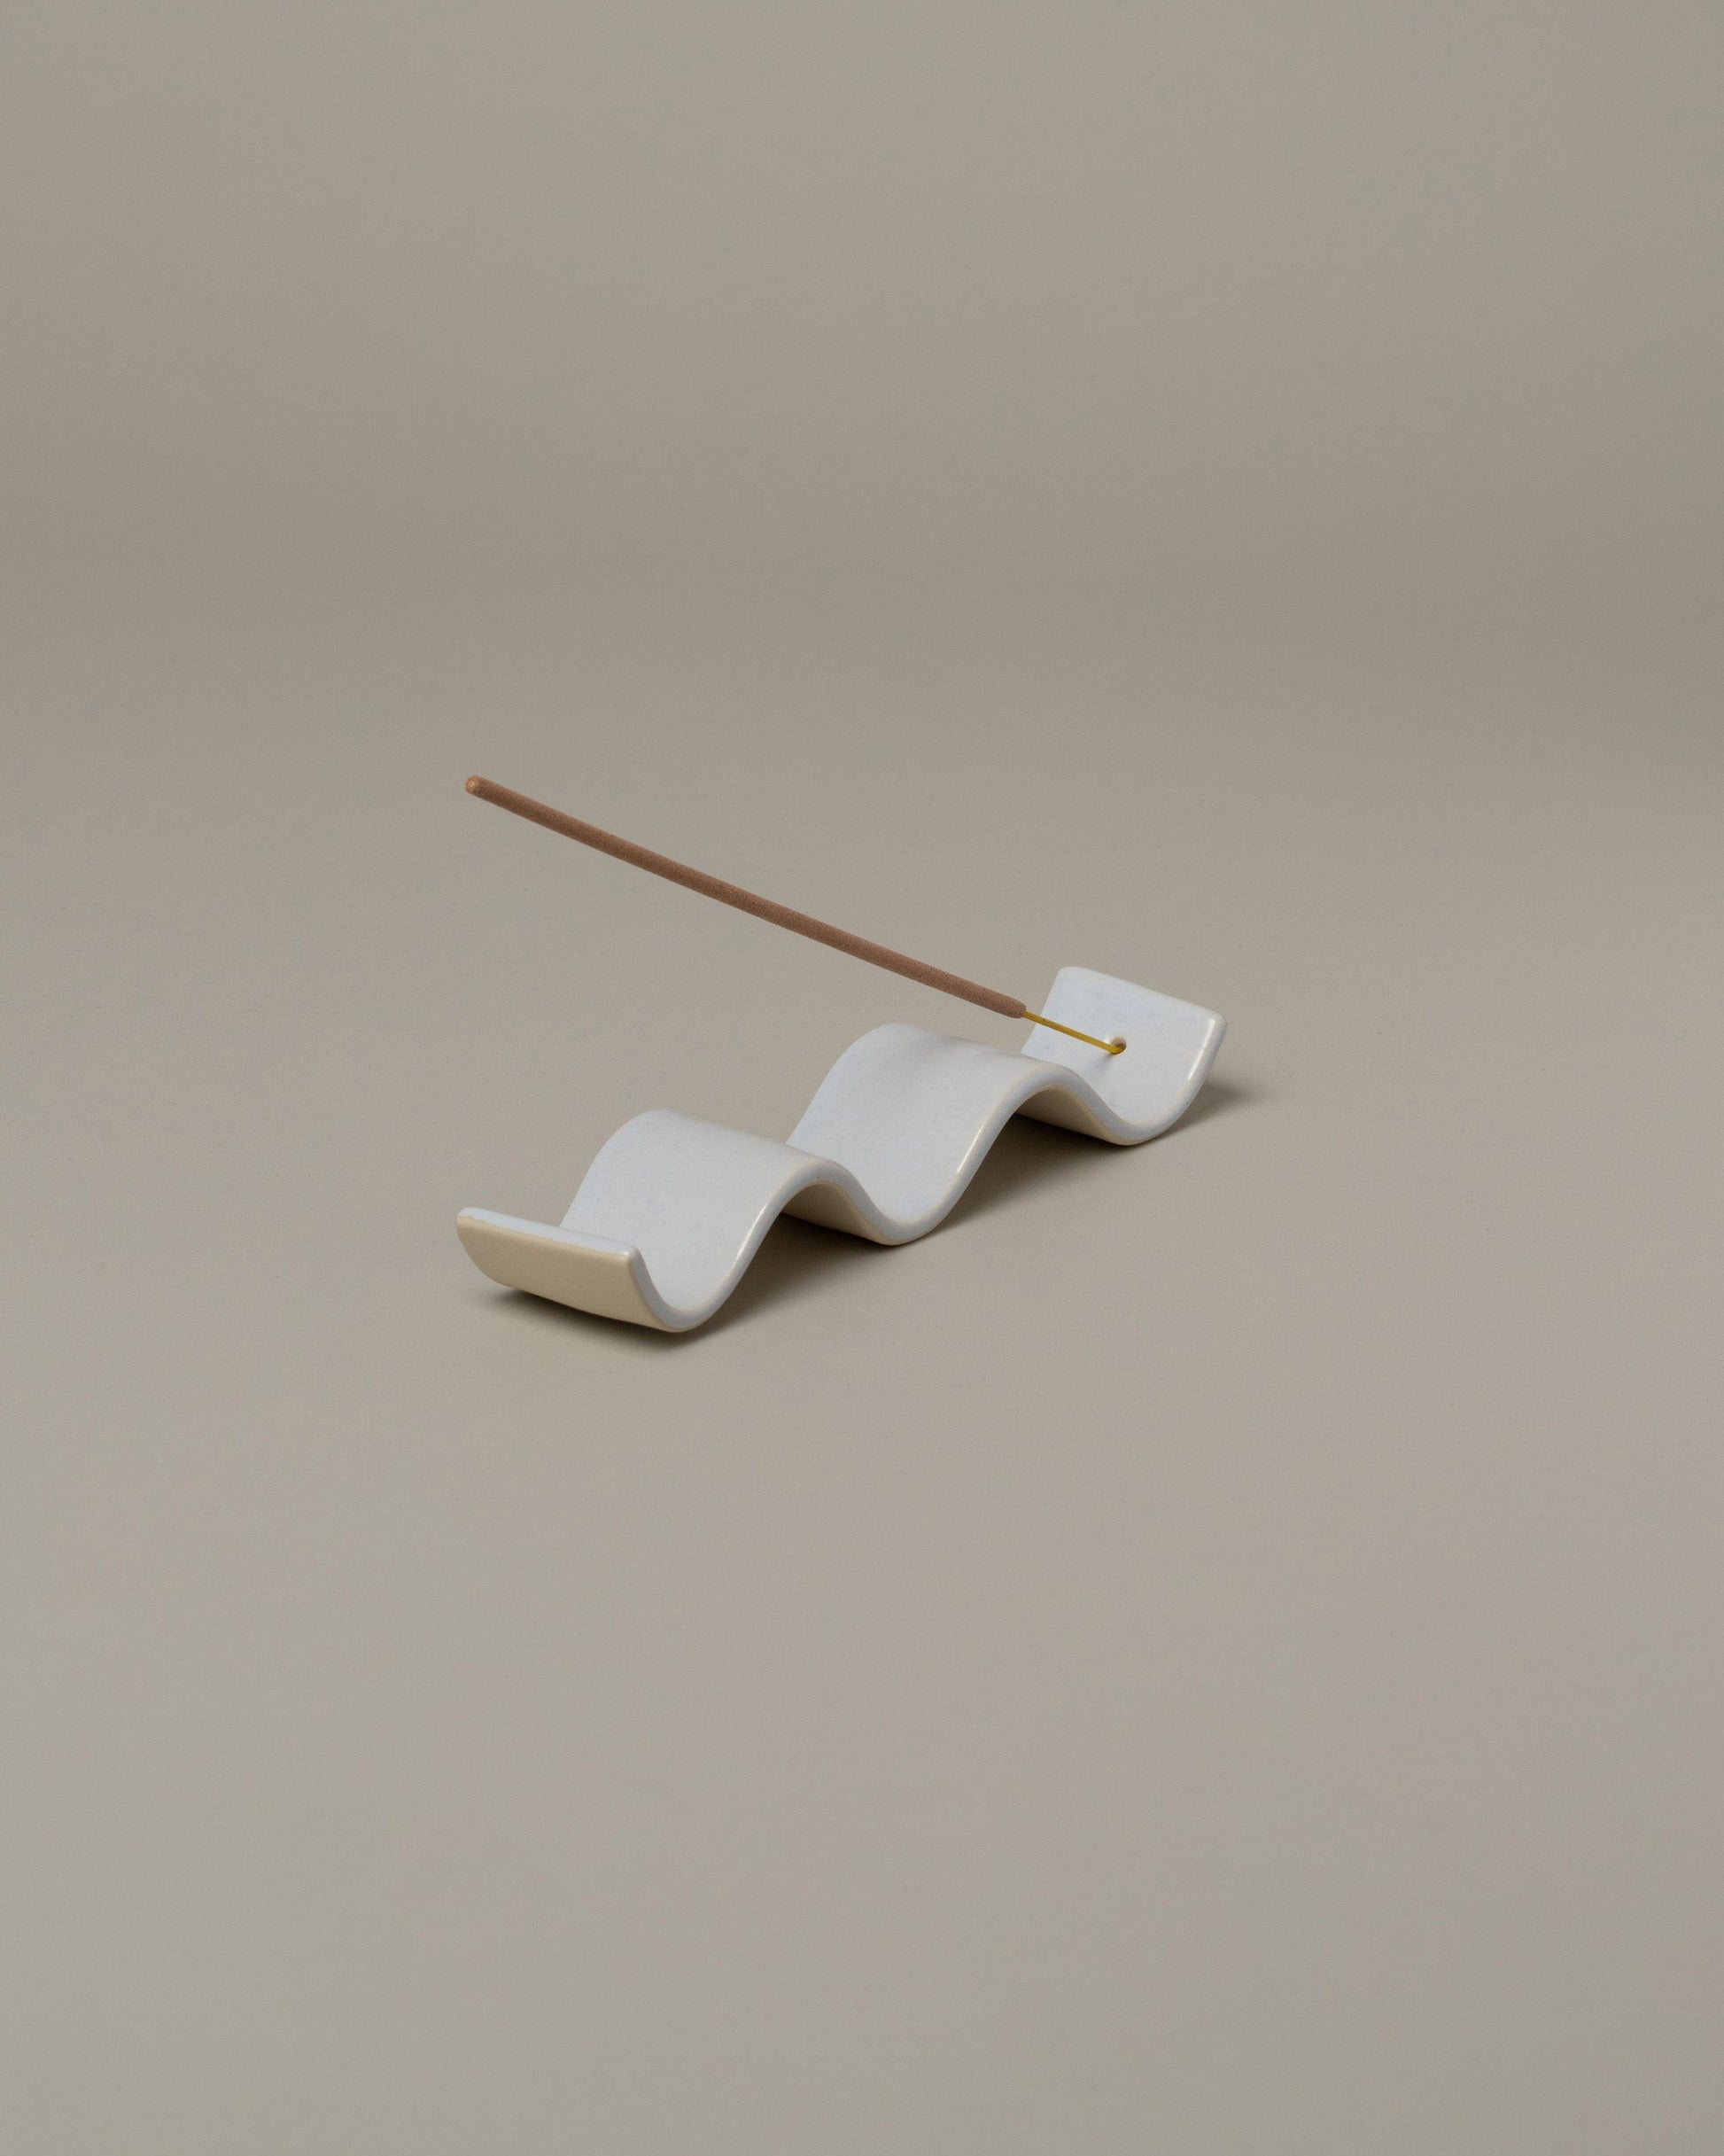 In-use detail view of the Rachel Saunders Glossy White Wave Incense Holder on light color background.